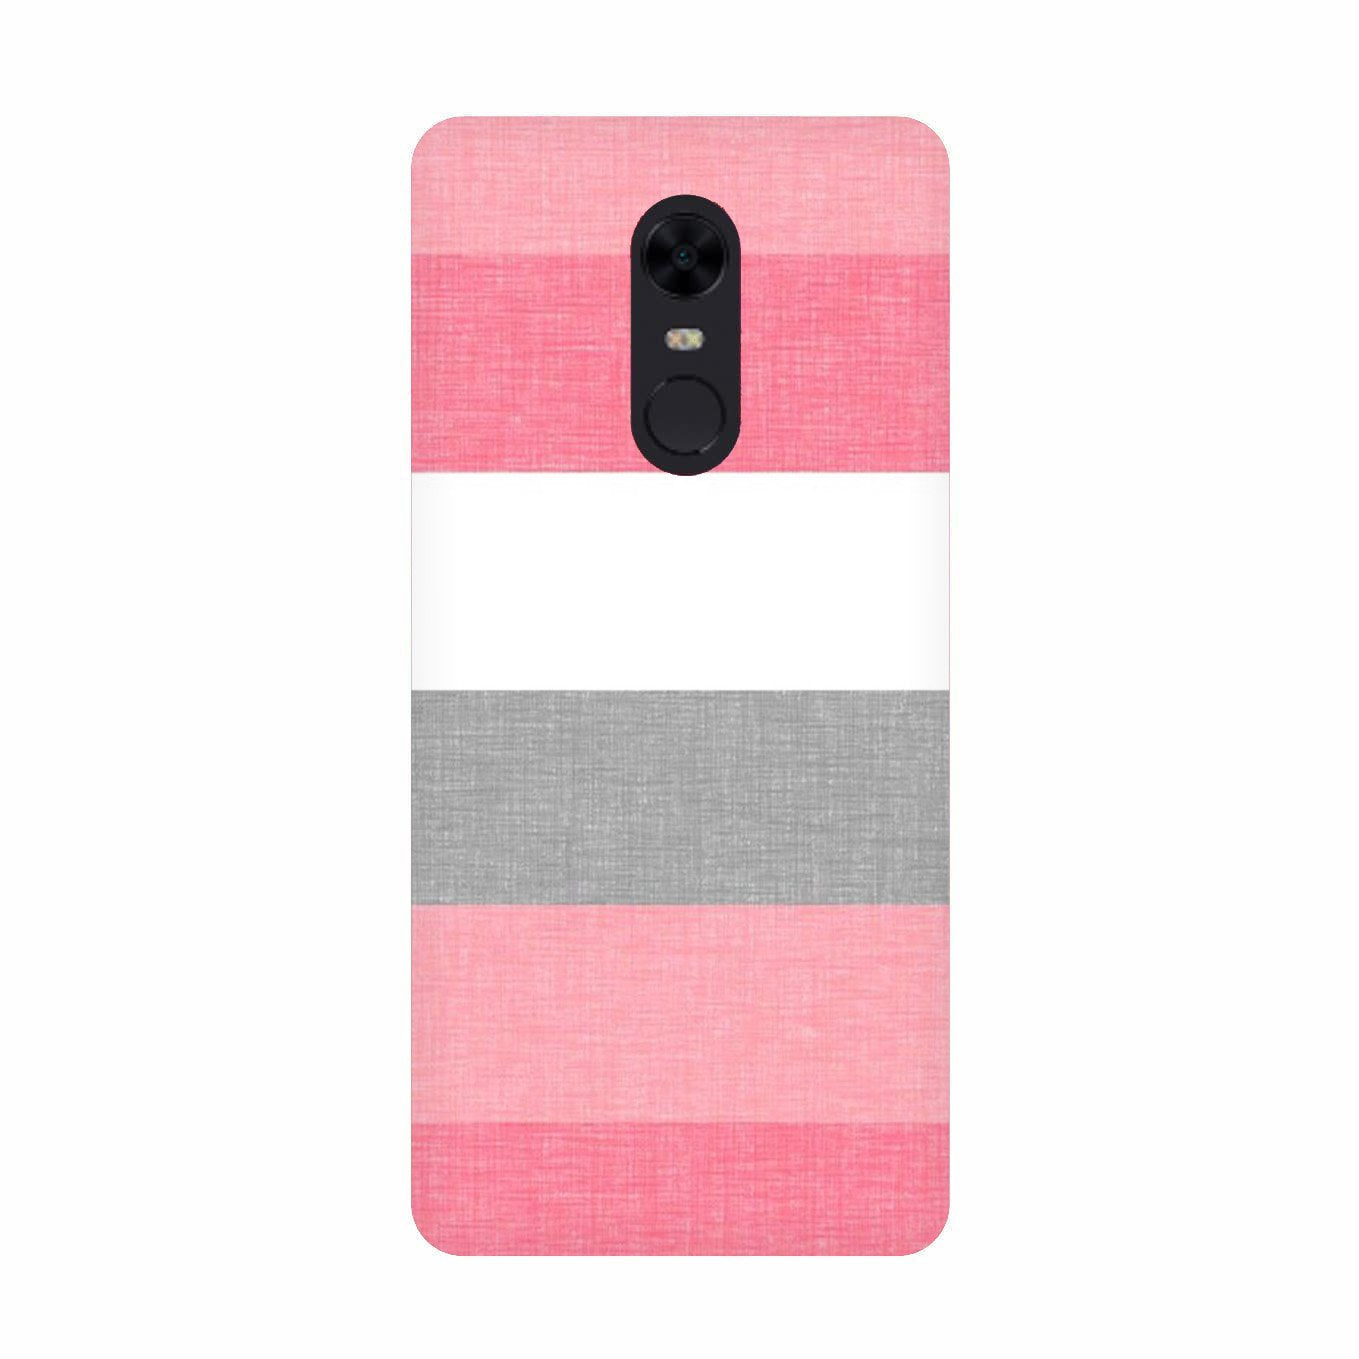 Pink white pattern Case for Redmi 5